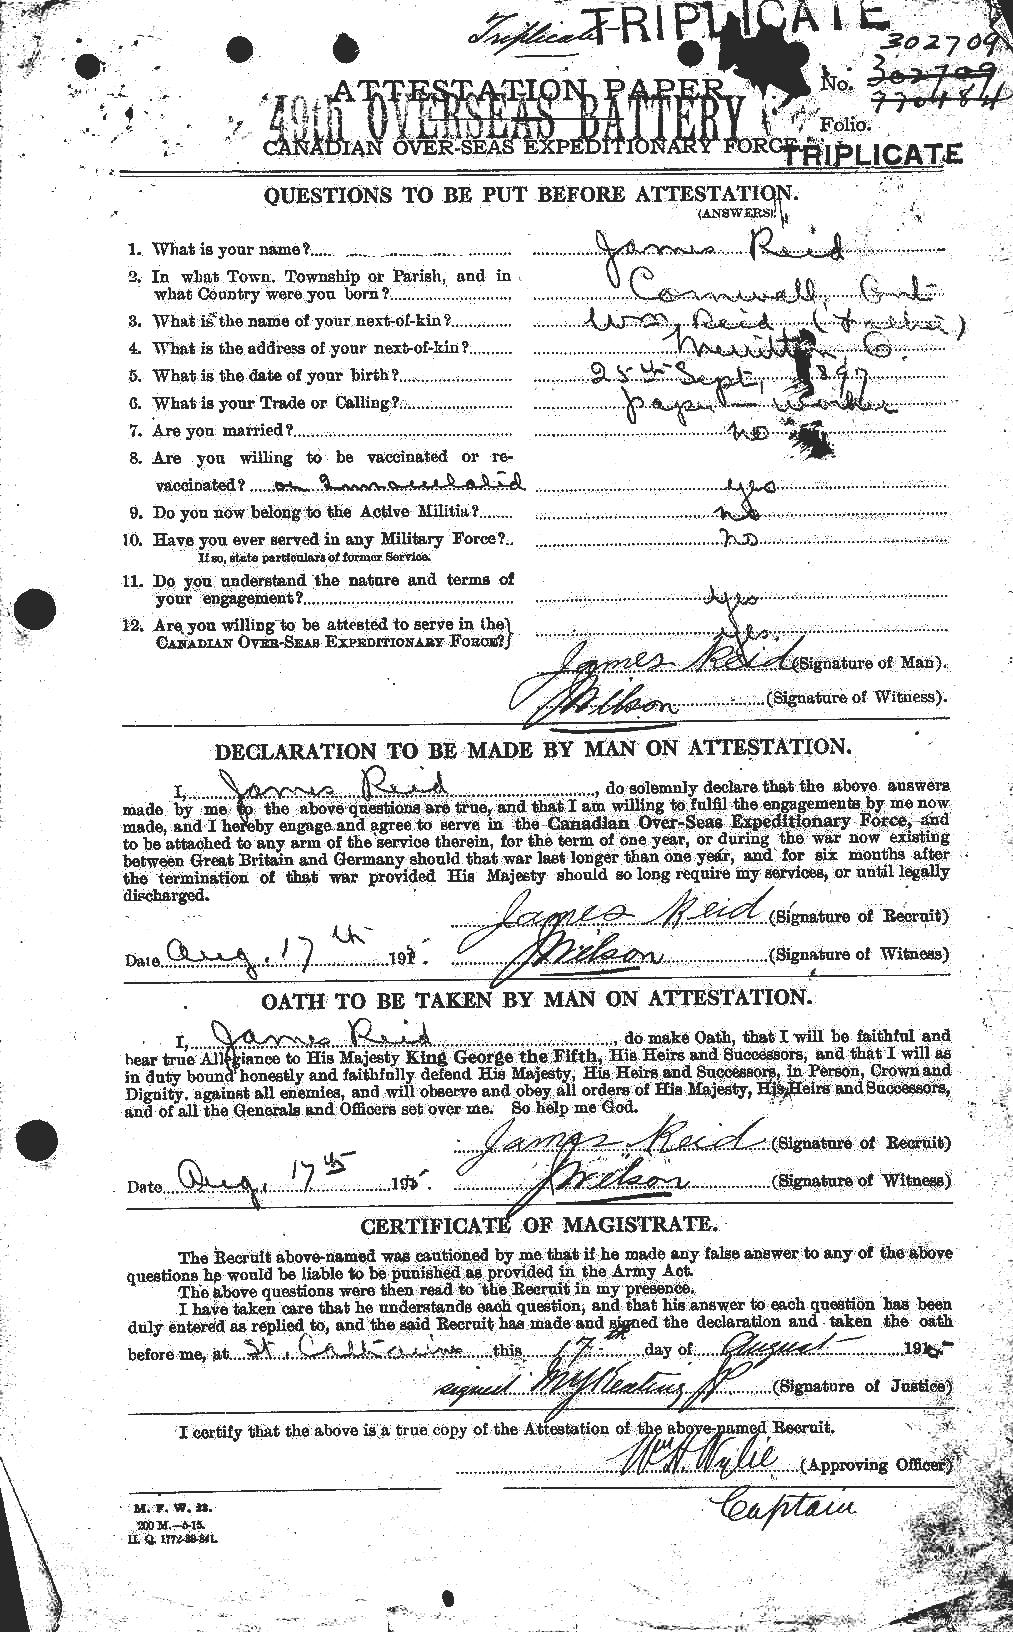 Personnel Records of the First World War - CEF 598658a